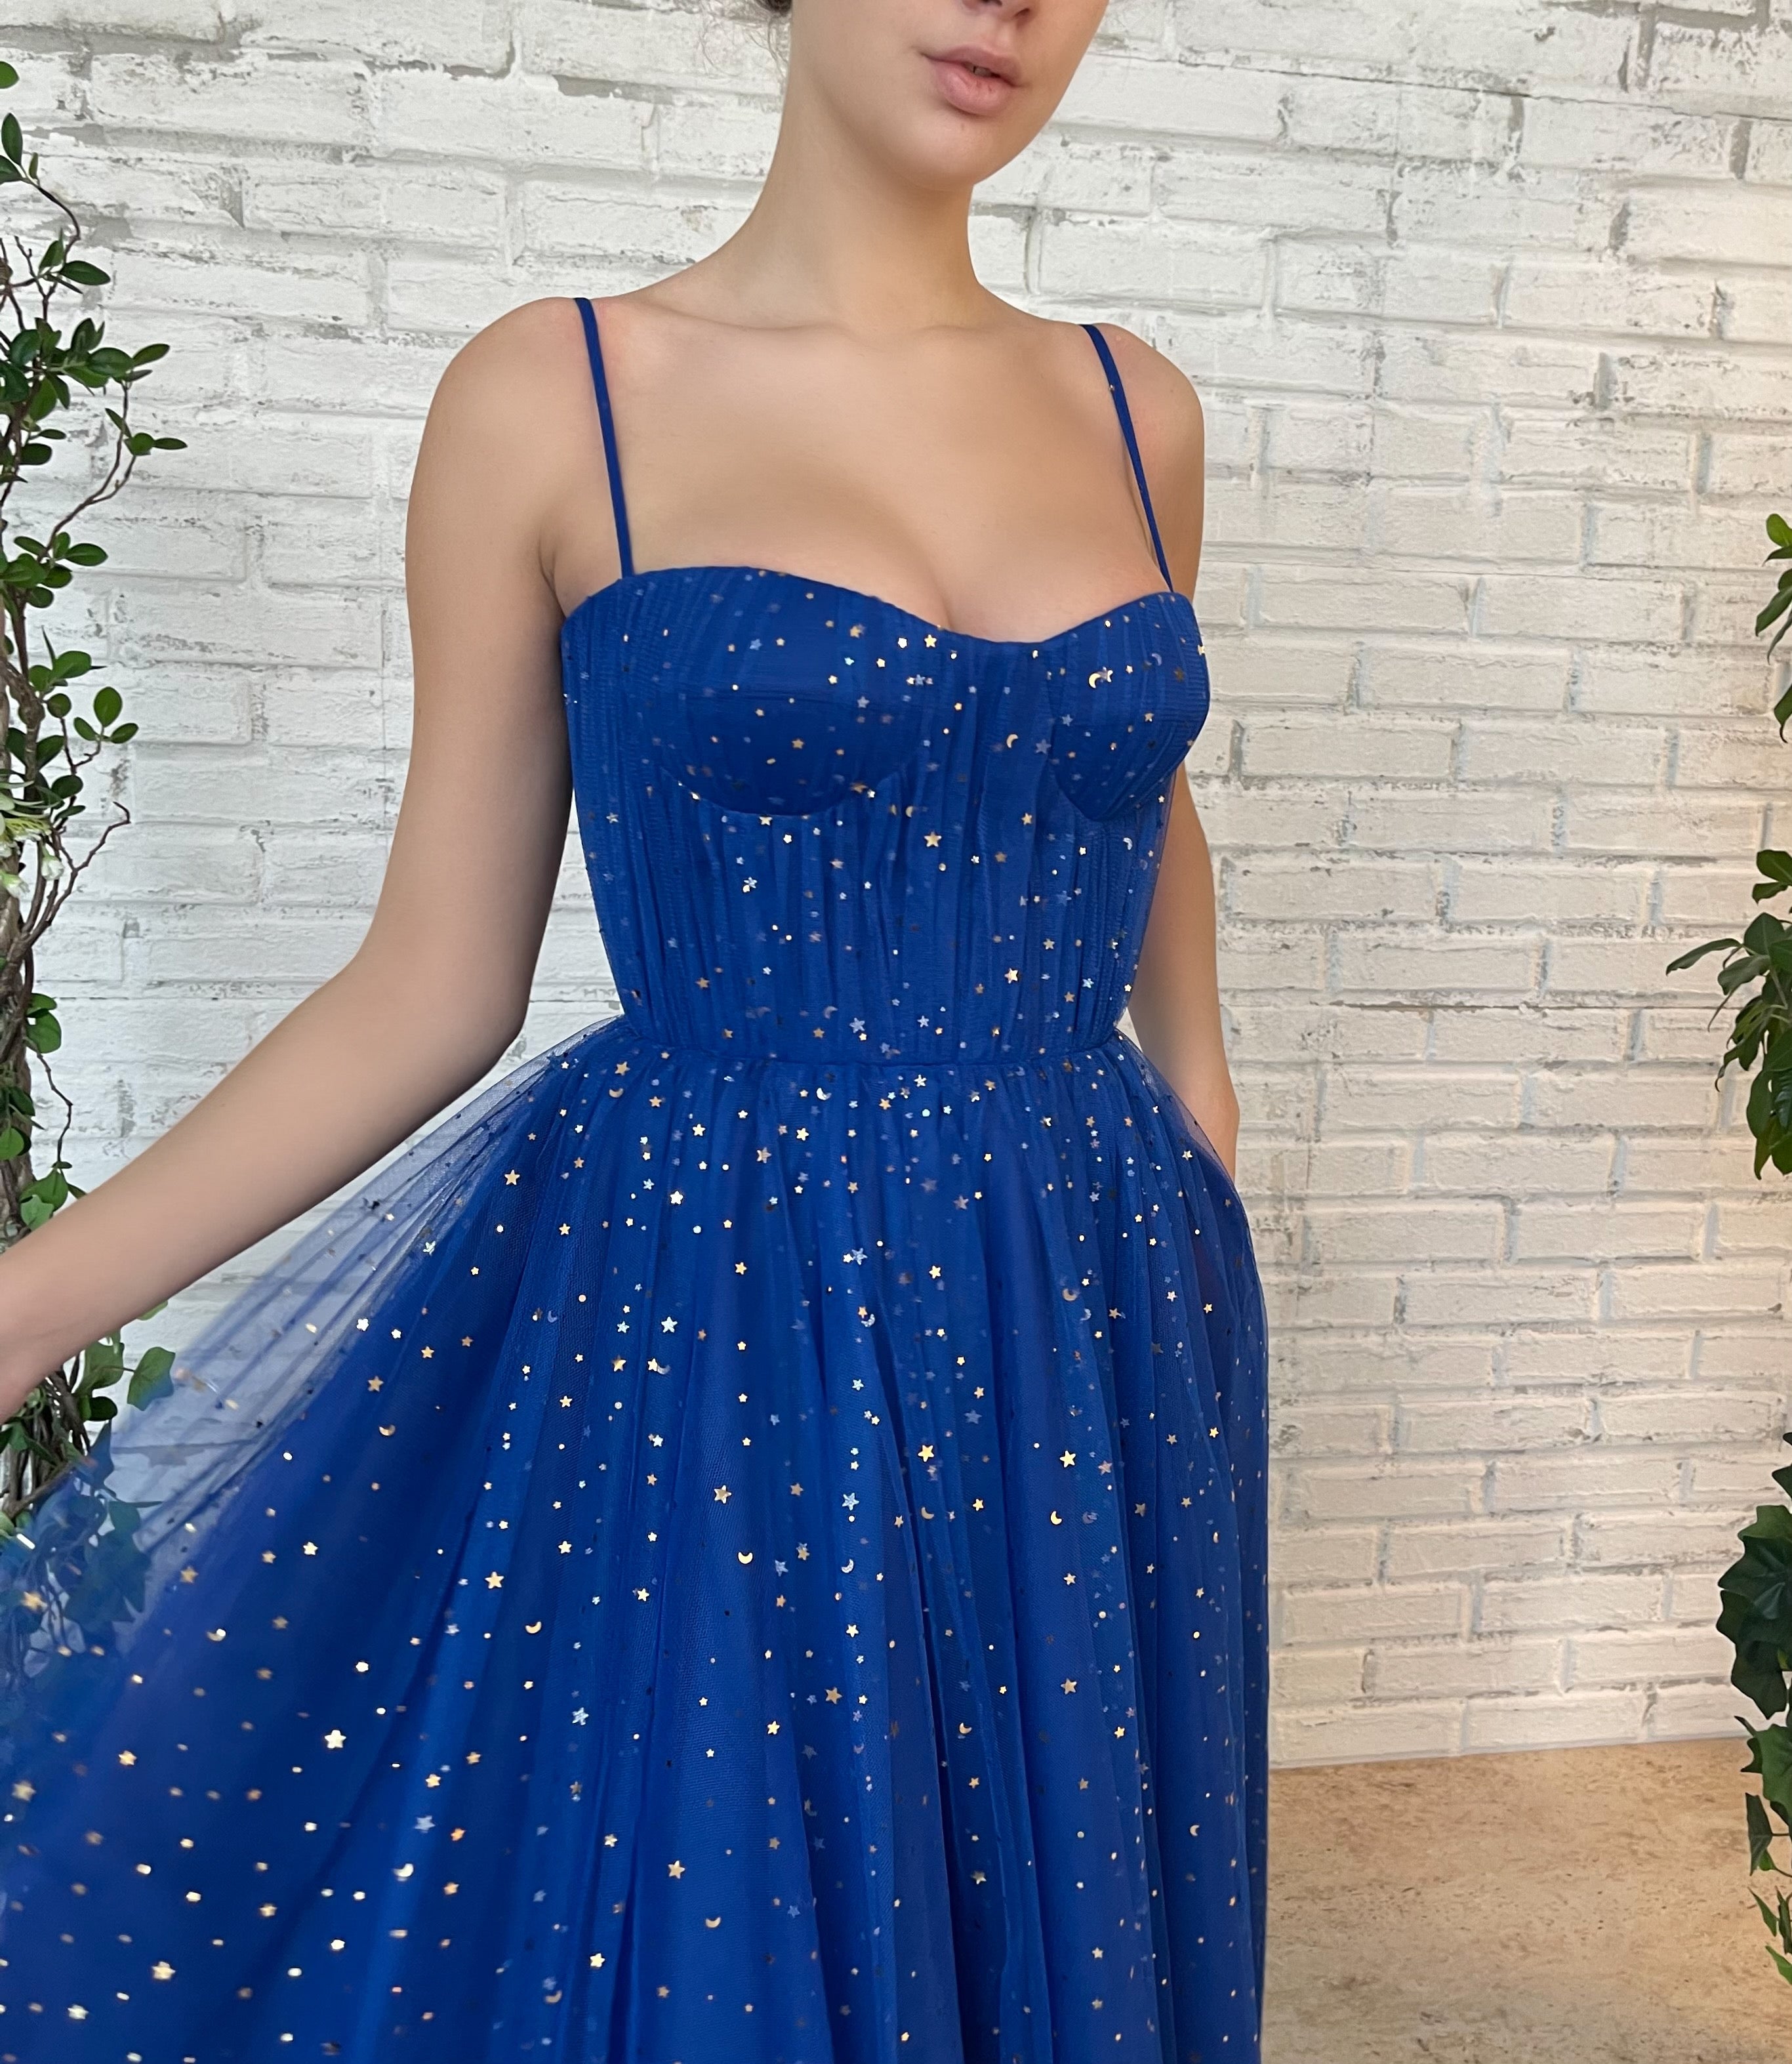 Blue midi dress with spaghetti straps and starry fabric